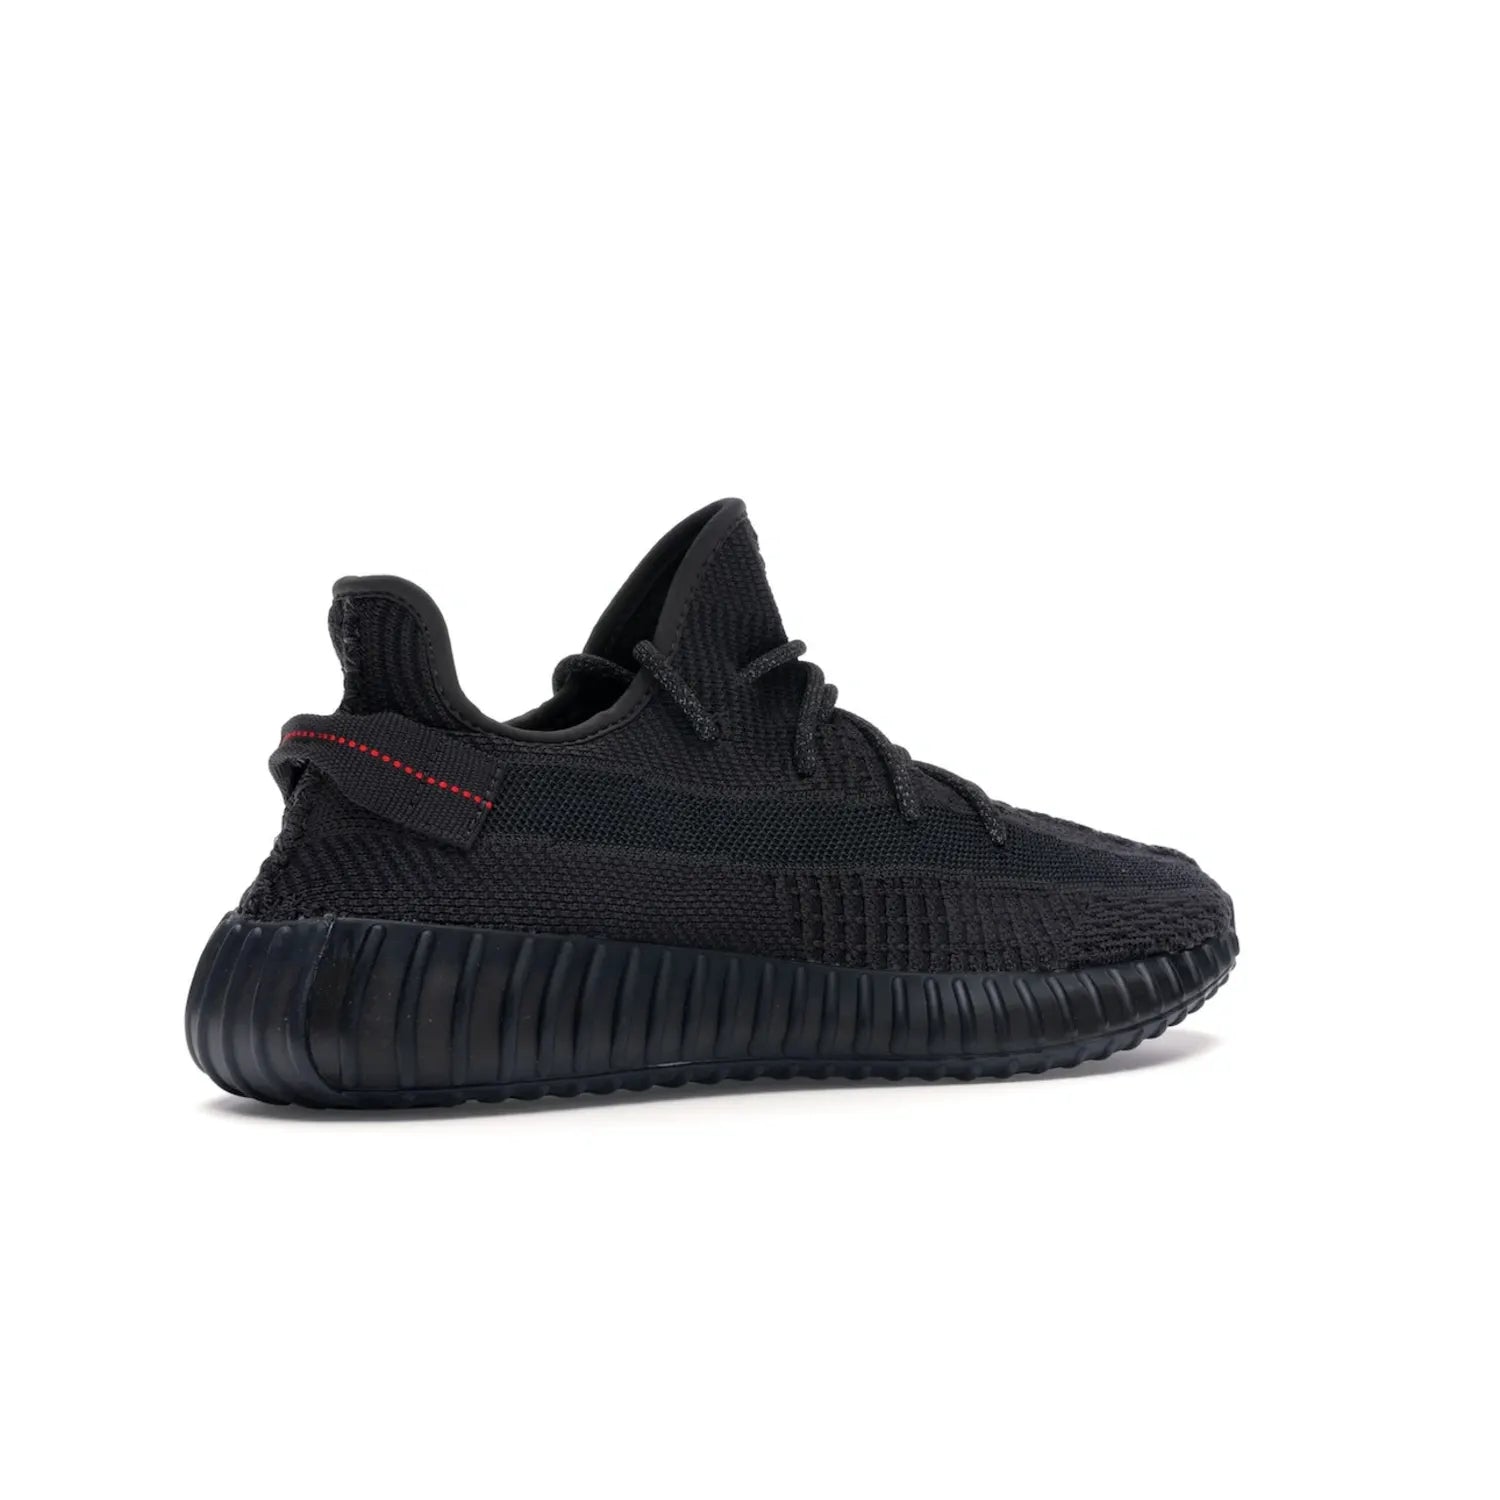 adidas Yeezy Boost 350 V2 Black (Non-Reflective) - Image 34 - Only at www.BallersClubKickz.com - A timeless, sleek silhouette crafted from quality materials. The adidas Yeezy Boost 350 V2 Black (Non-Reflective) brings style and sophistication. Get yours now!